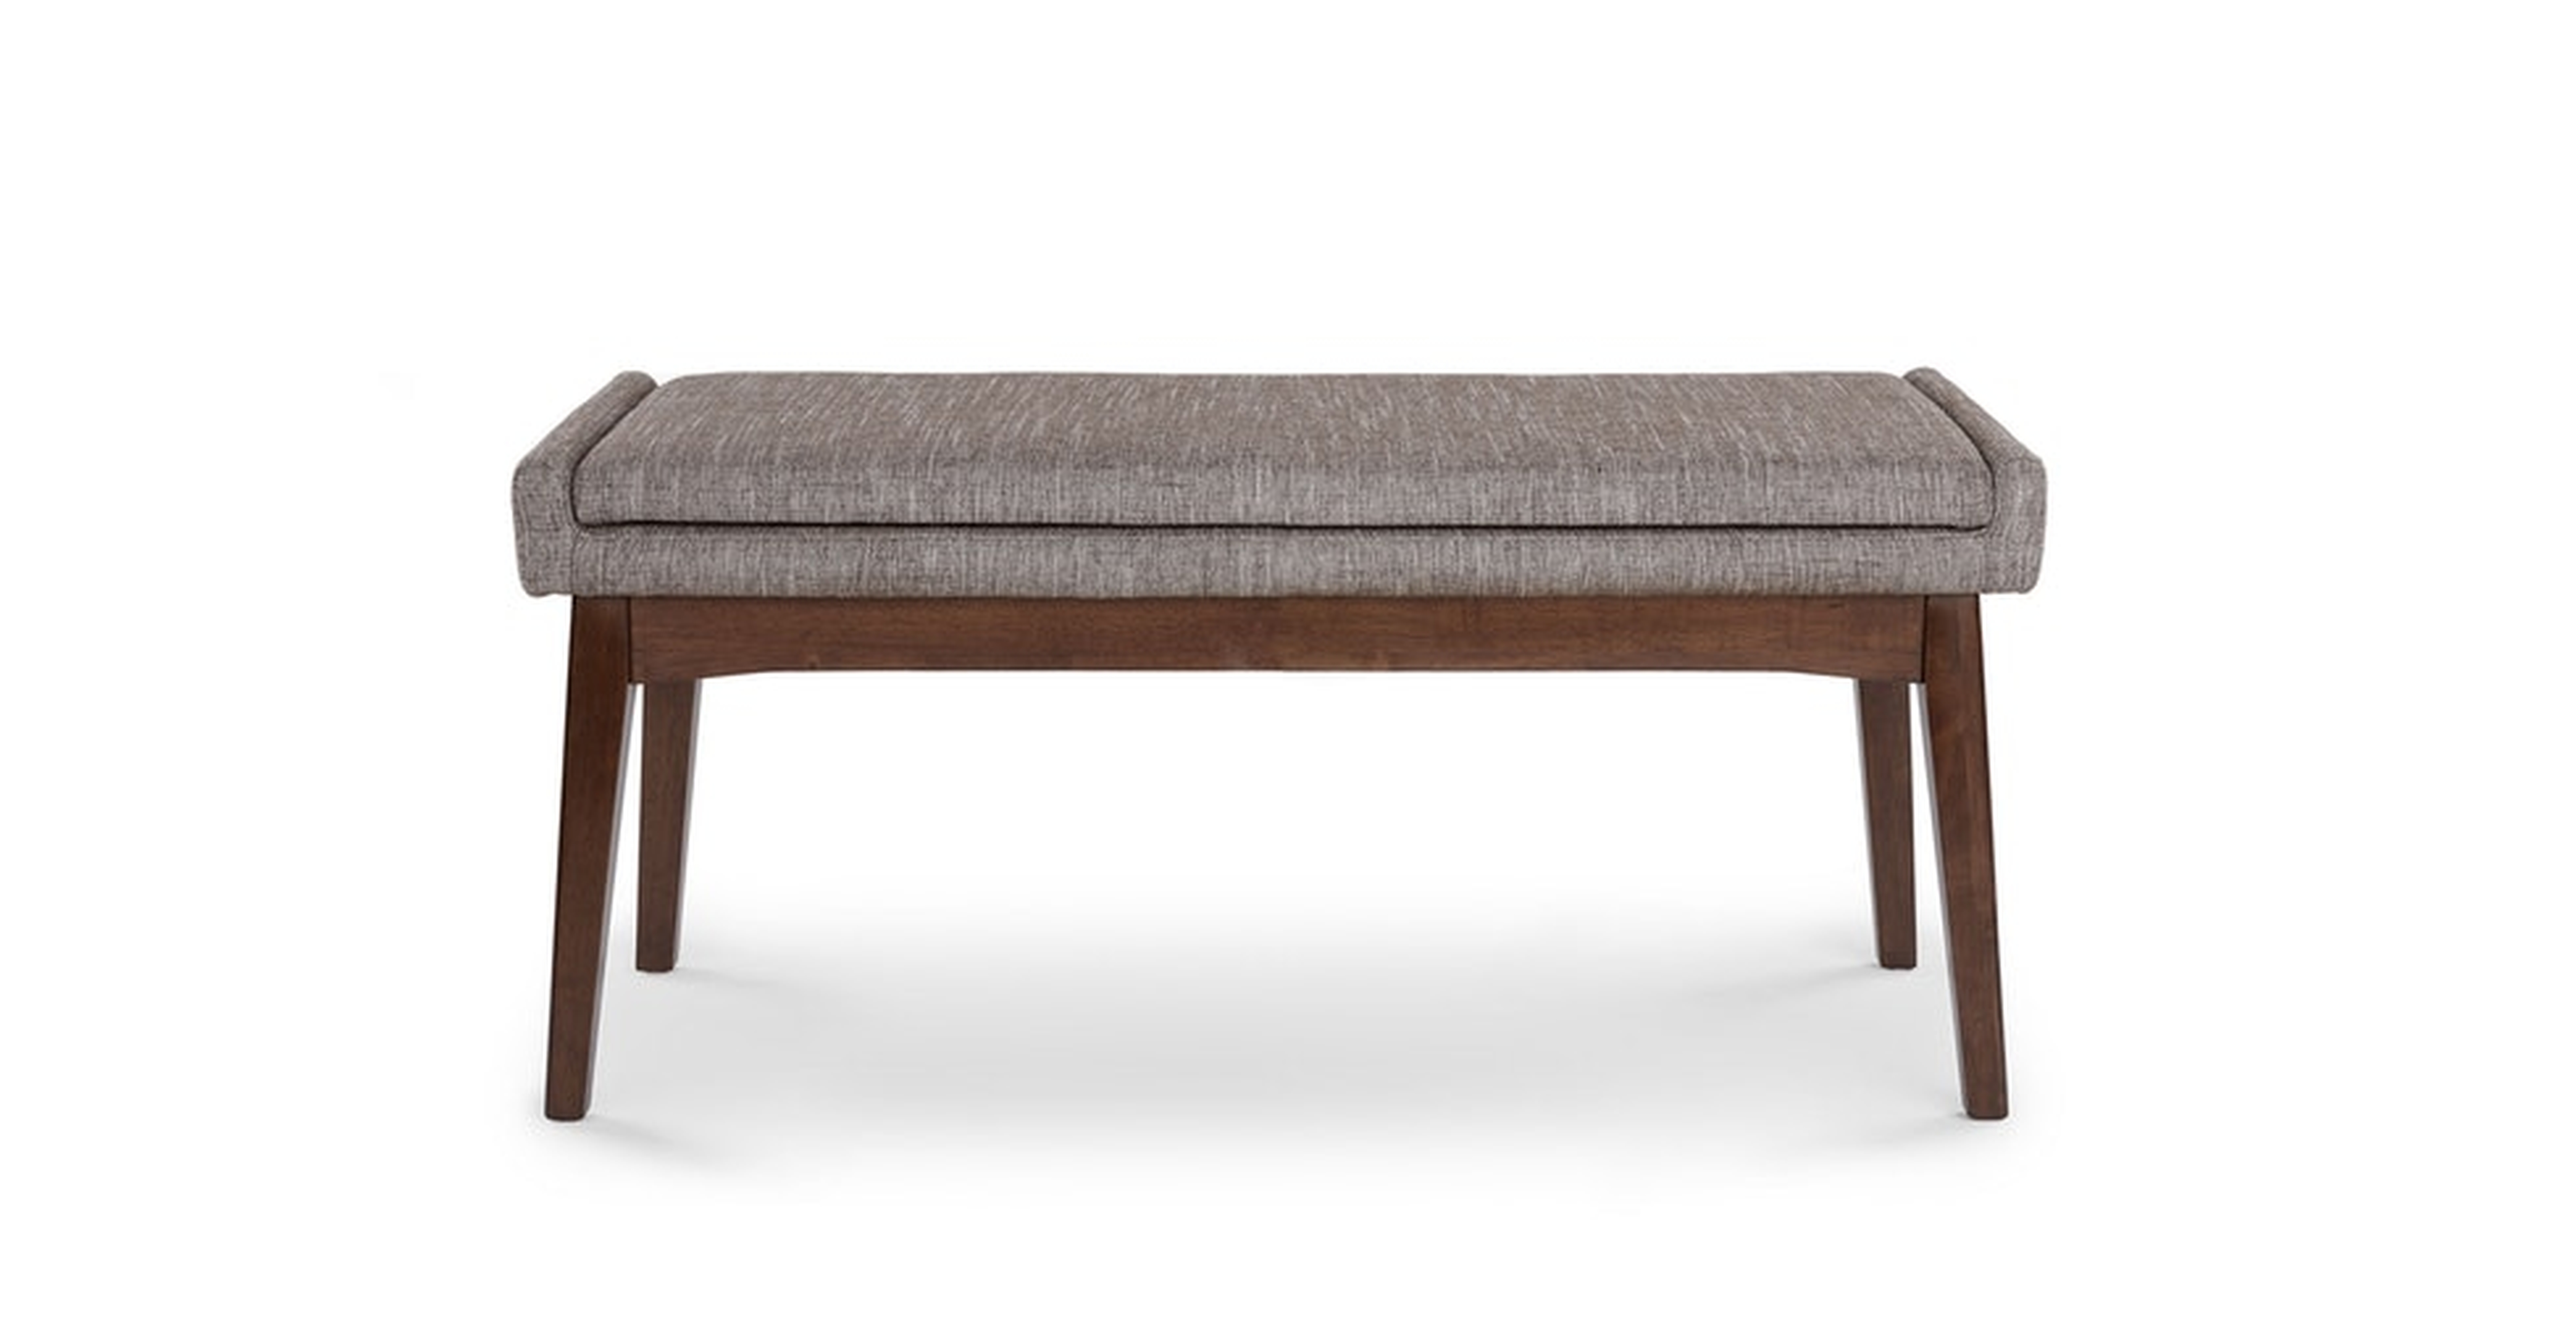 Chanel Volcanic Gray 43" Bench - Article